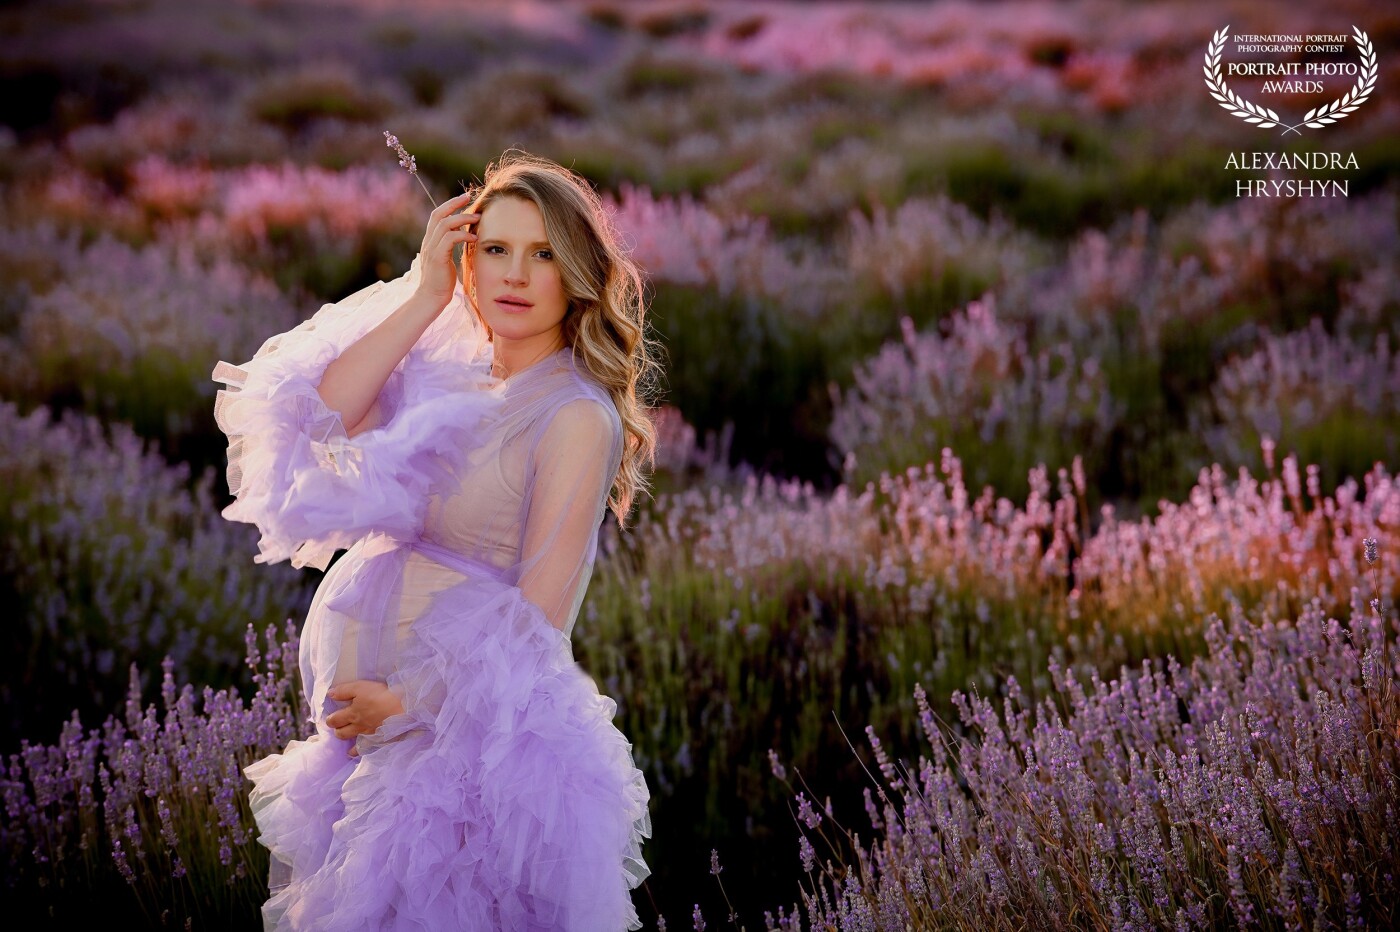 Mother lavender<br />
Maternity photo shoot on a Lavender field in Souther California. June 2022<br />
The moment that should have been remembered